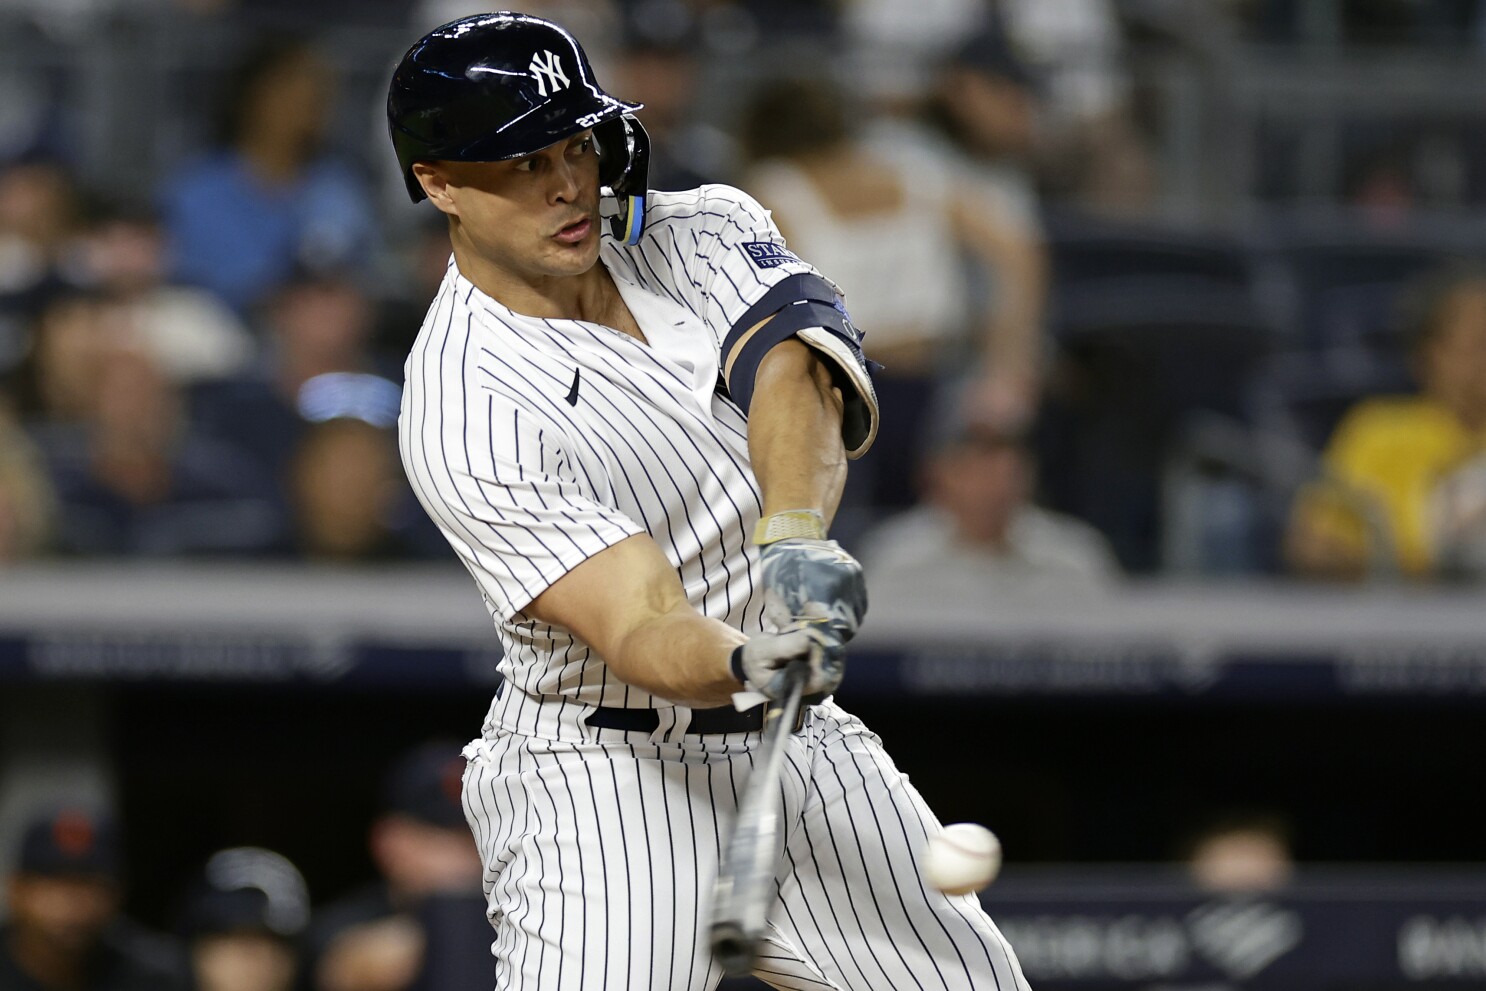 Yankees slugger Giancarlo Stanton will continue to get field work